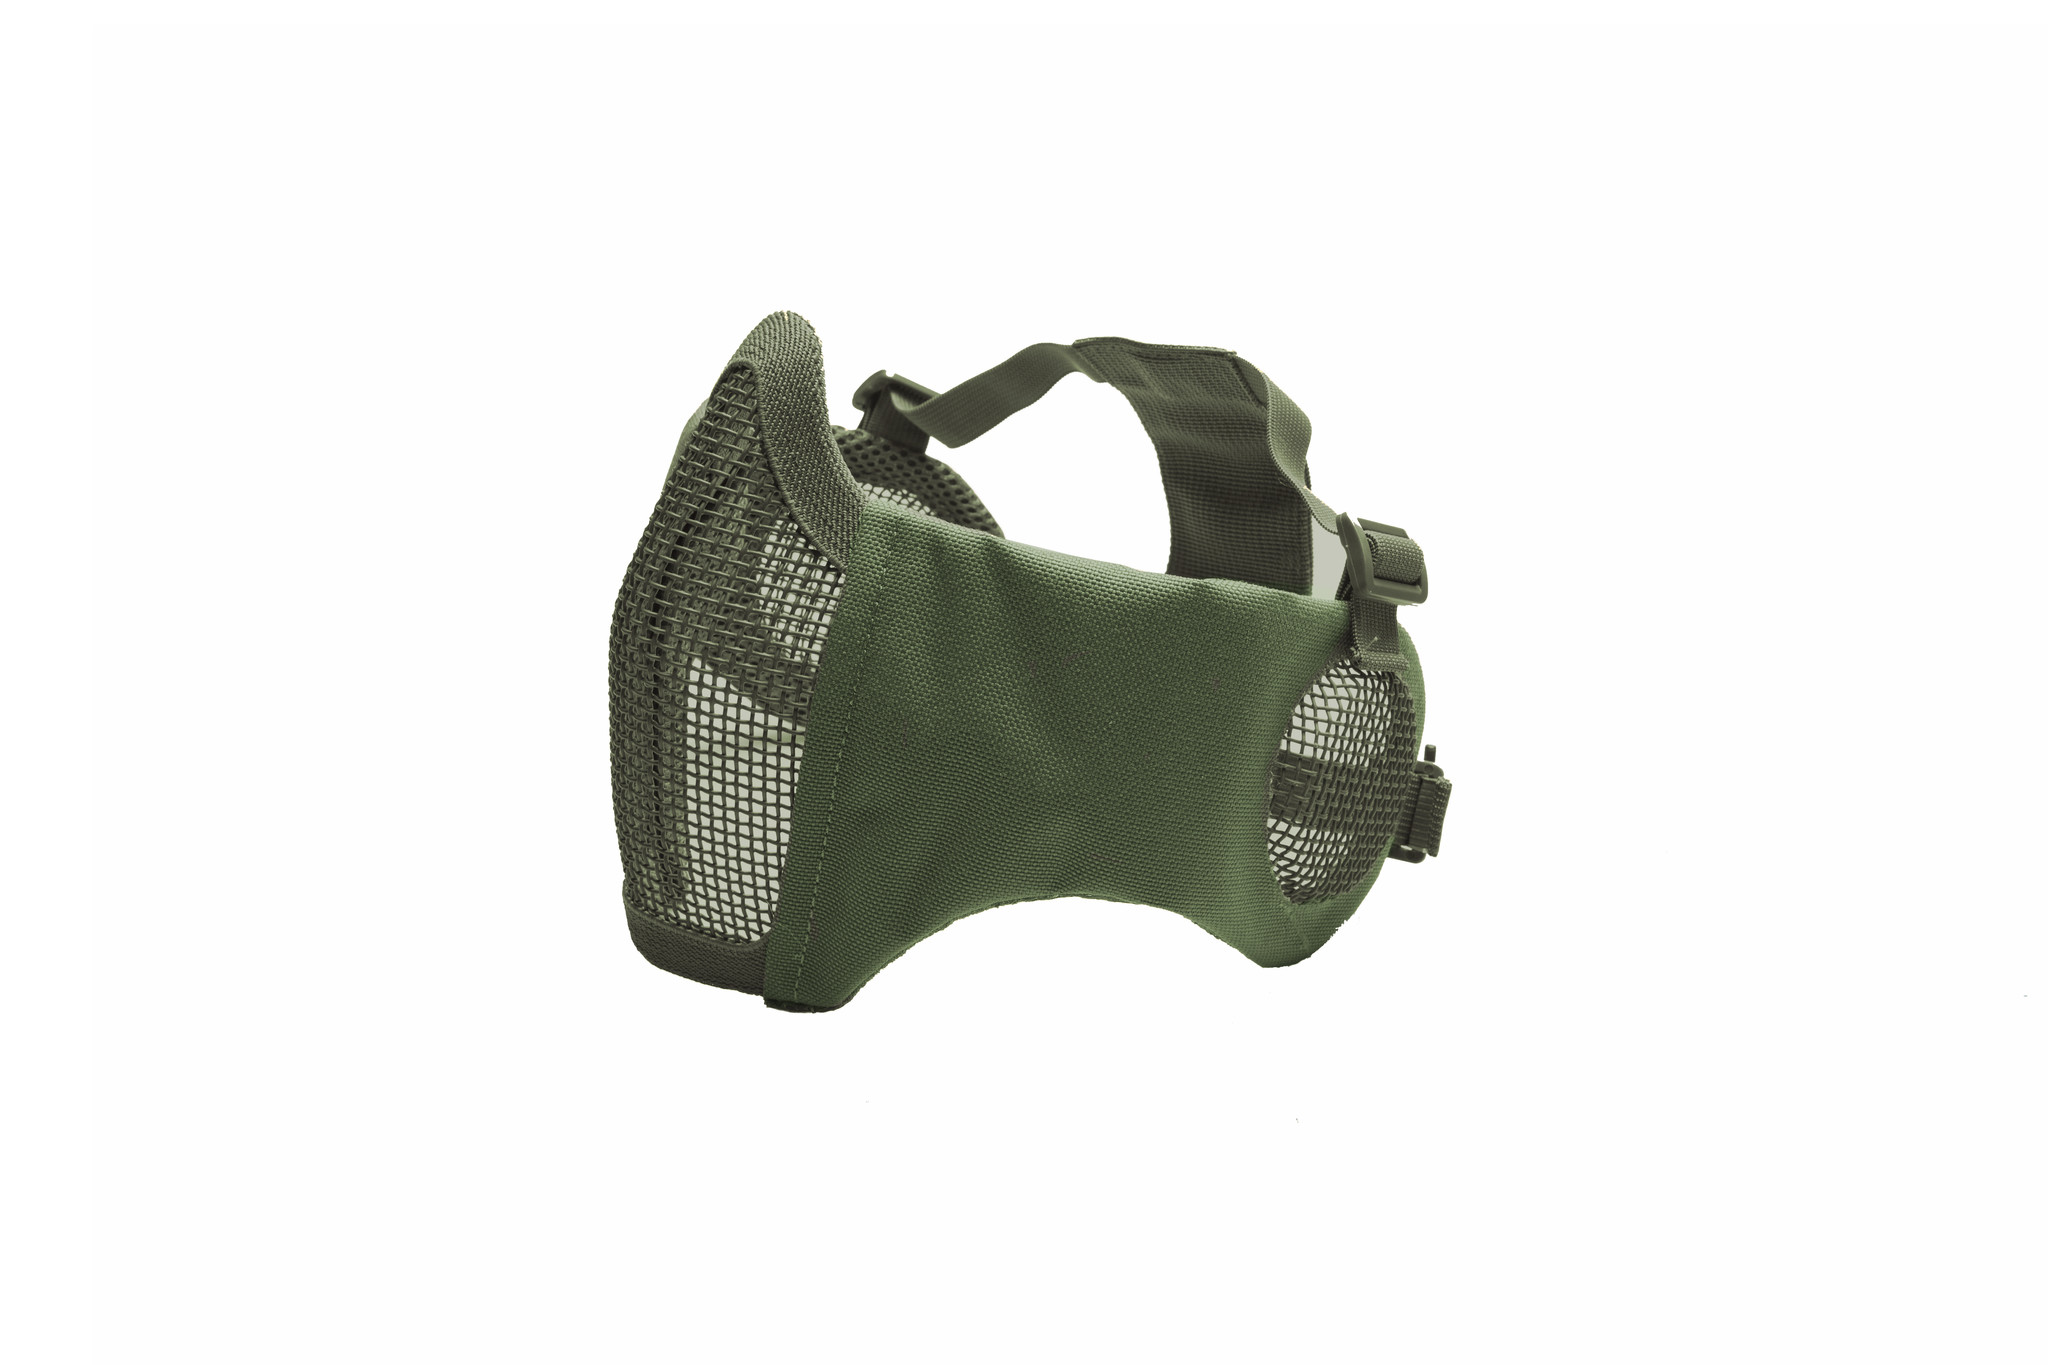 ASG Mesh Mask with cheek pads and ear protection - OD